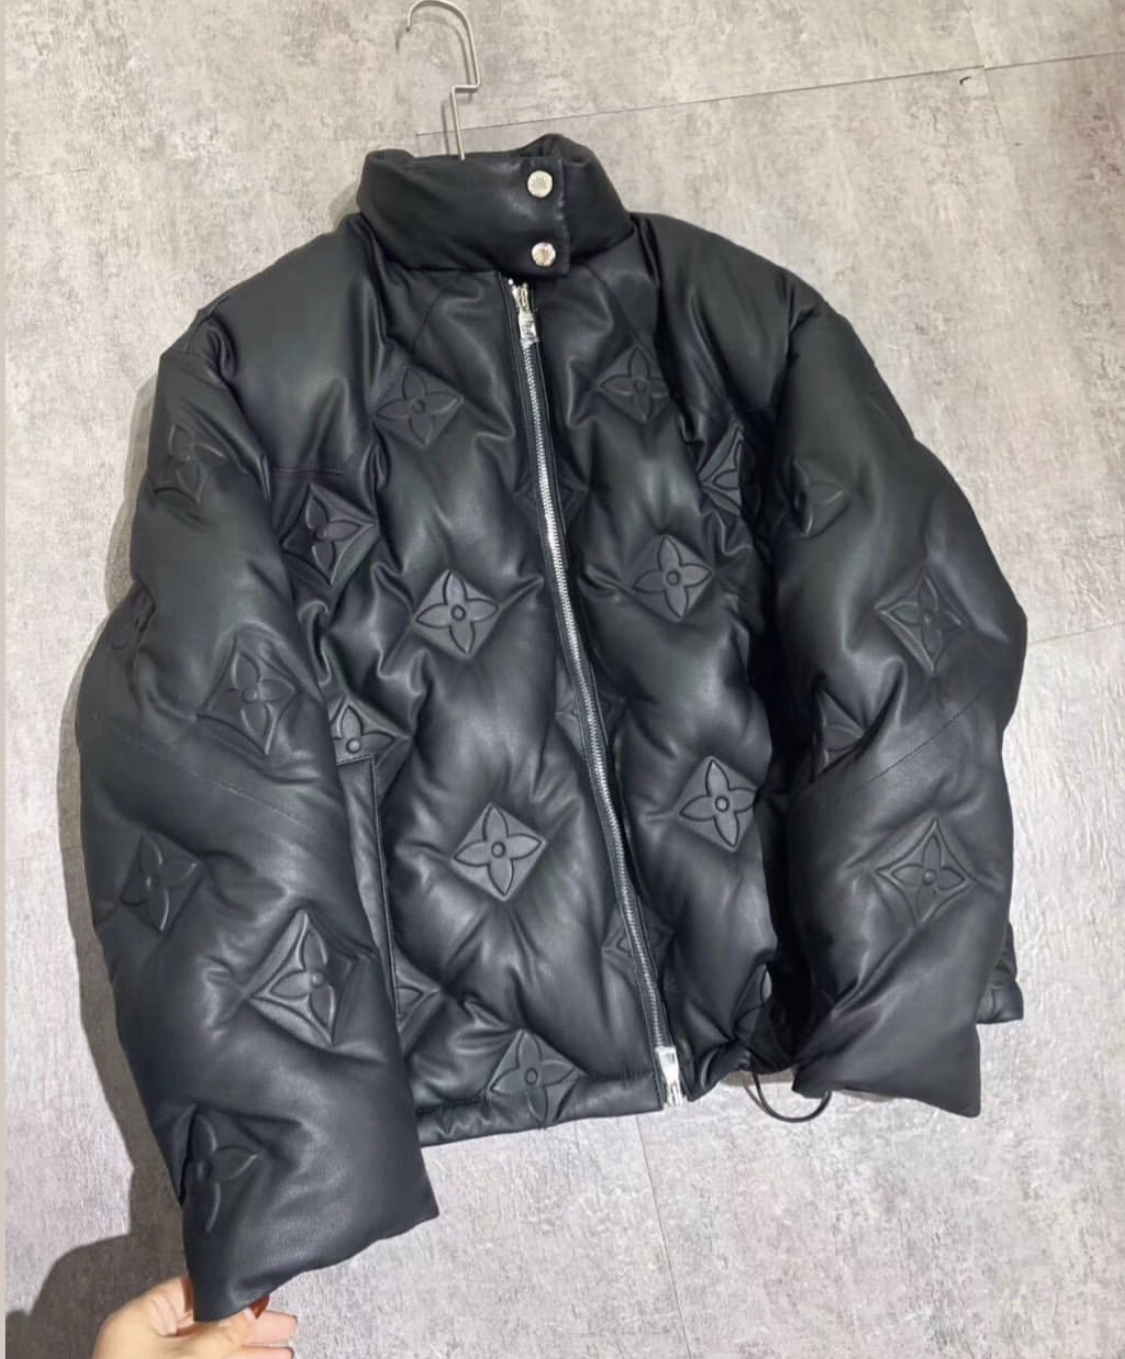 Louis Vuitton Leather Jackets - 12 For Sale on 1stDibs  louis vuitton monogram  leather jacket, lv jacket, leather jacket louis vuitton